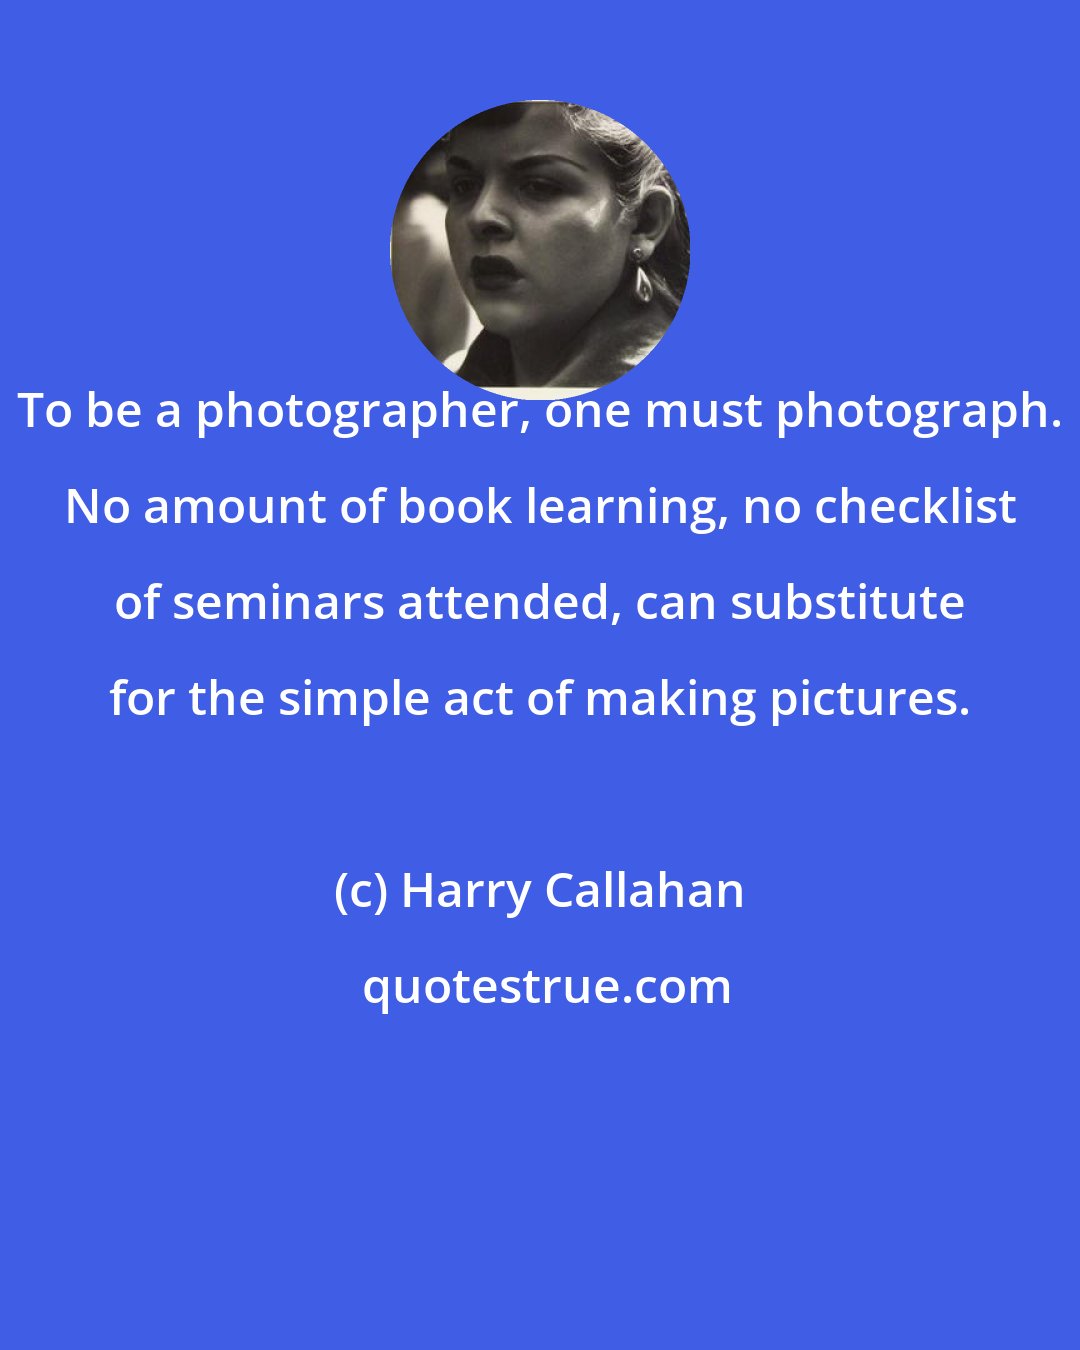 Harry Callahan: To be a photographer, one must photograph. No amount of book learning, no checklist of seminars attended, can substitute for the simple act of making pictures.